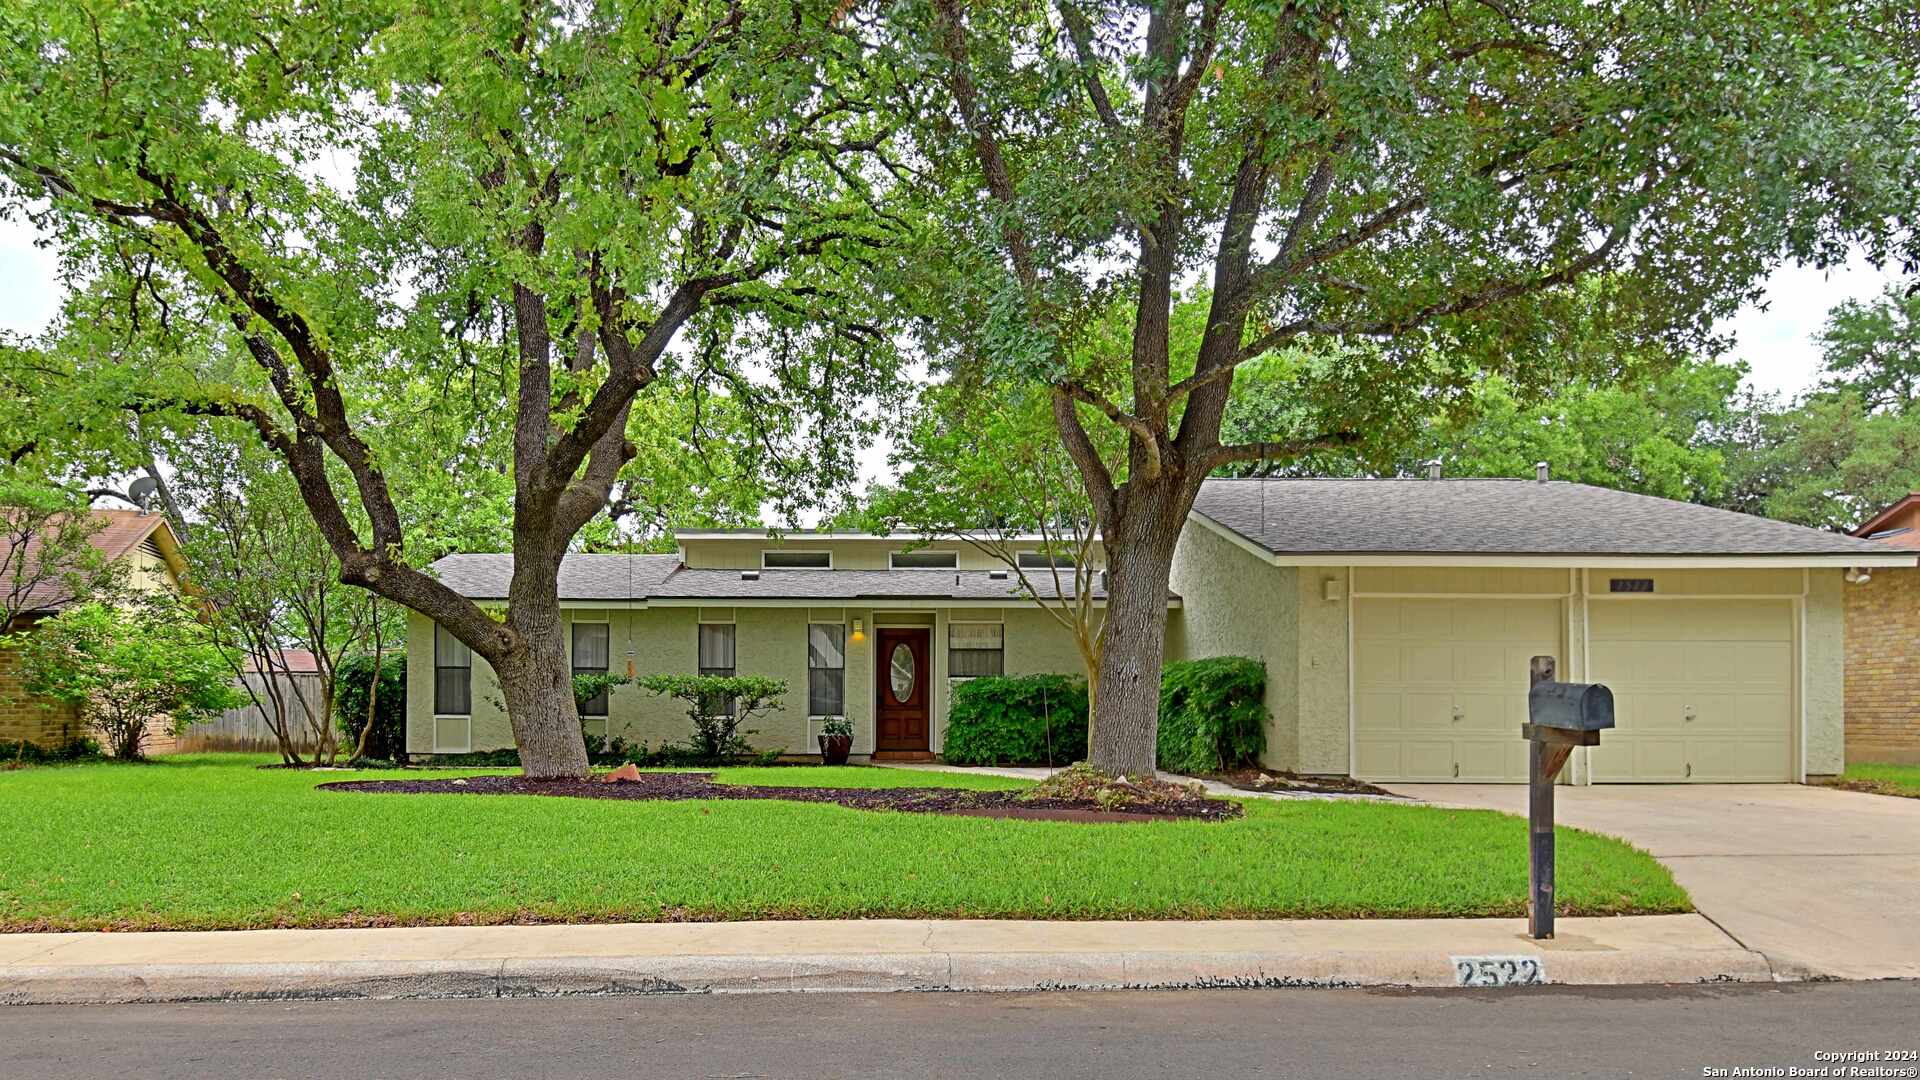 Photo of 2522 Old Trail St in San Antonio, TX